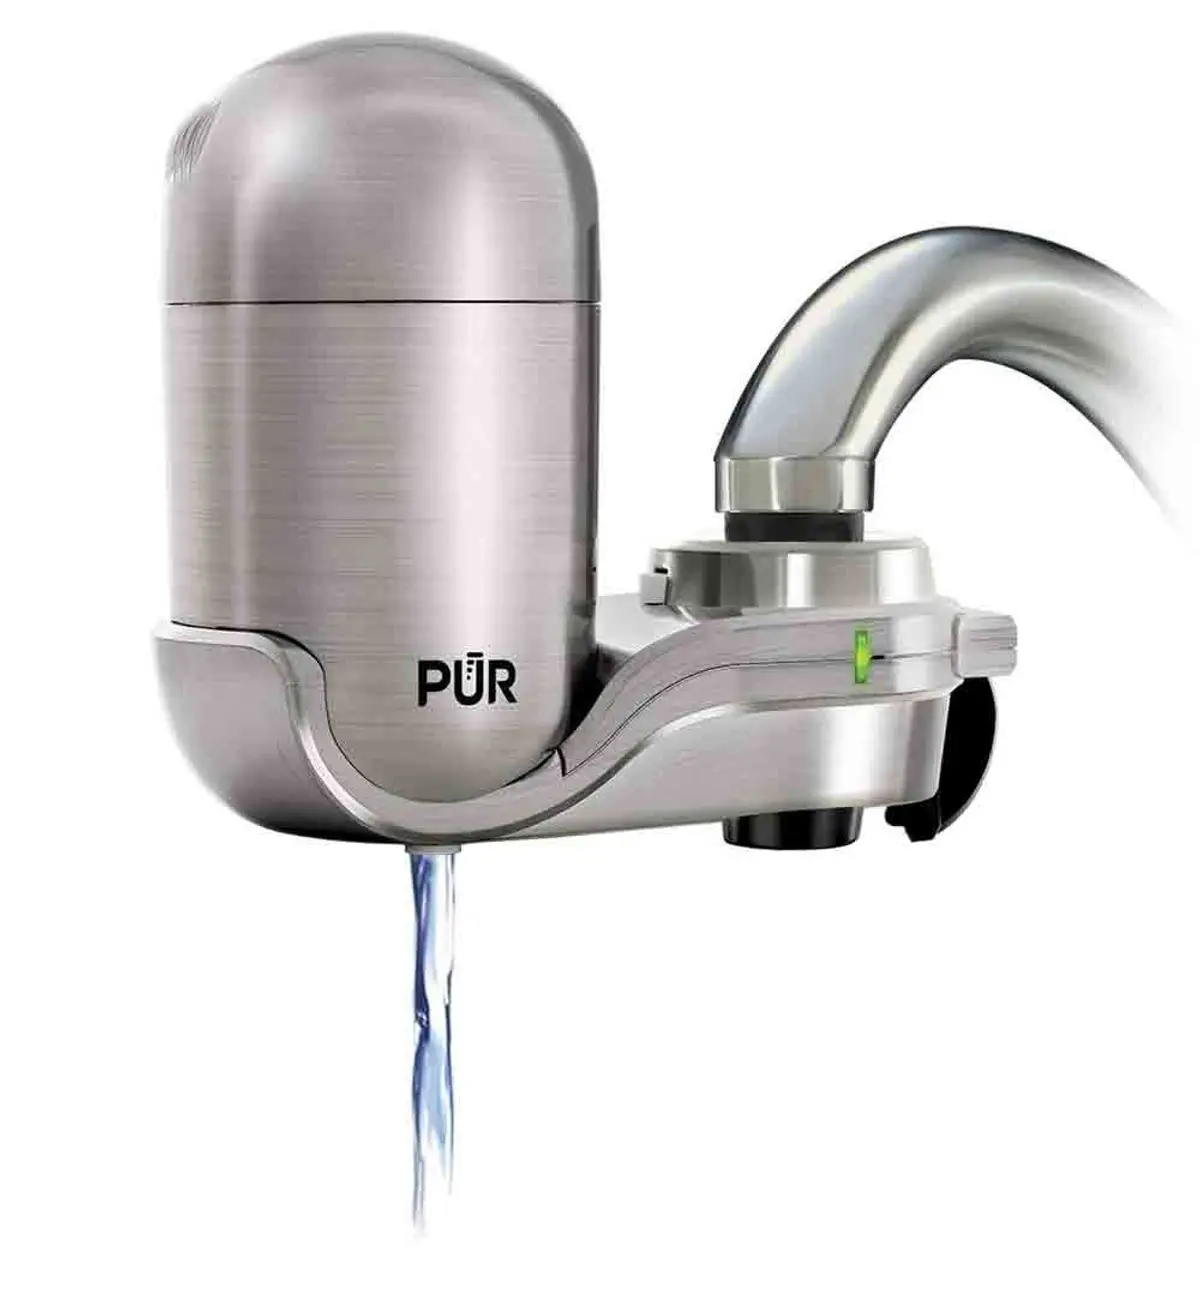 PUR Advanced Faucet Water Filter Review